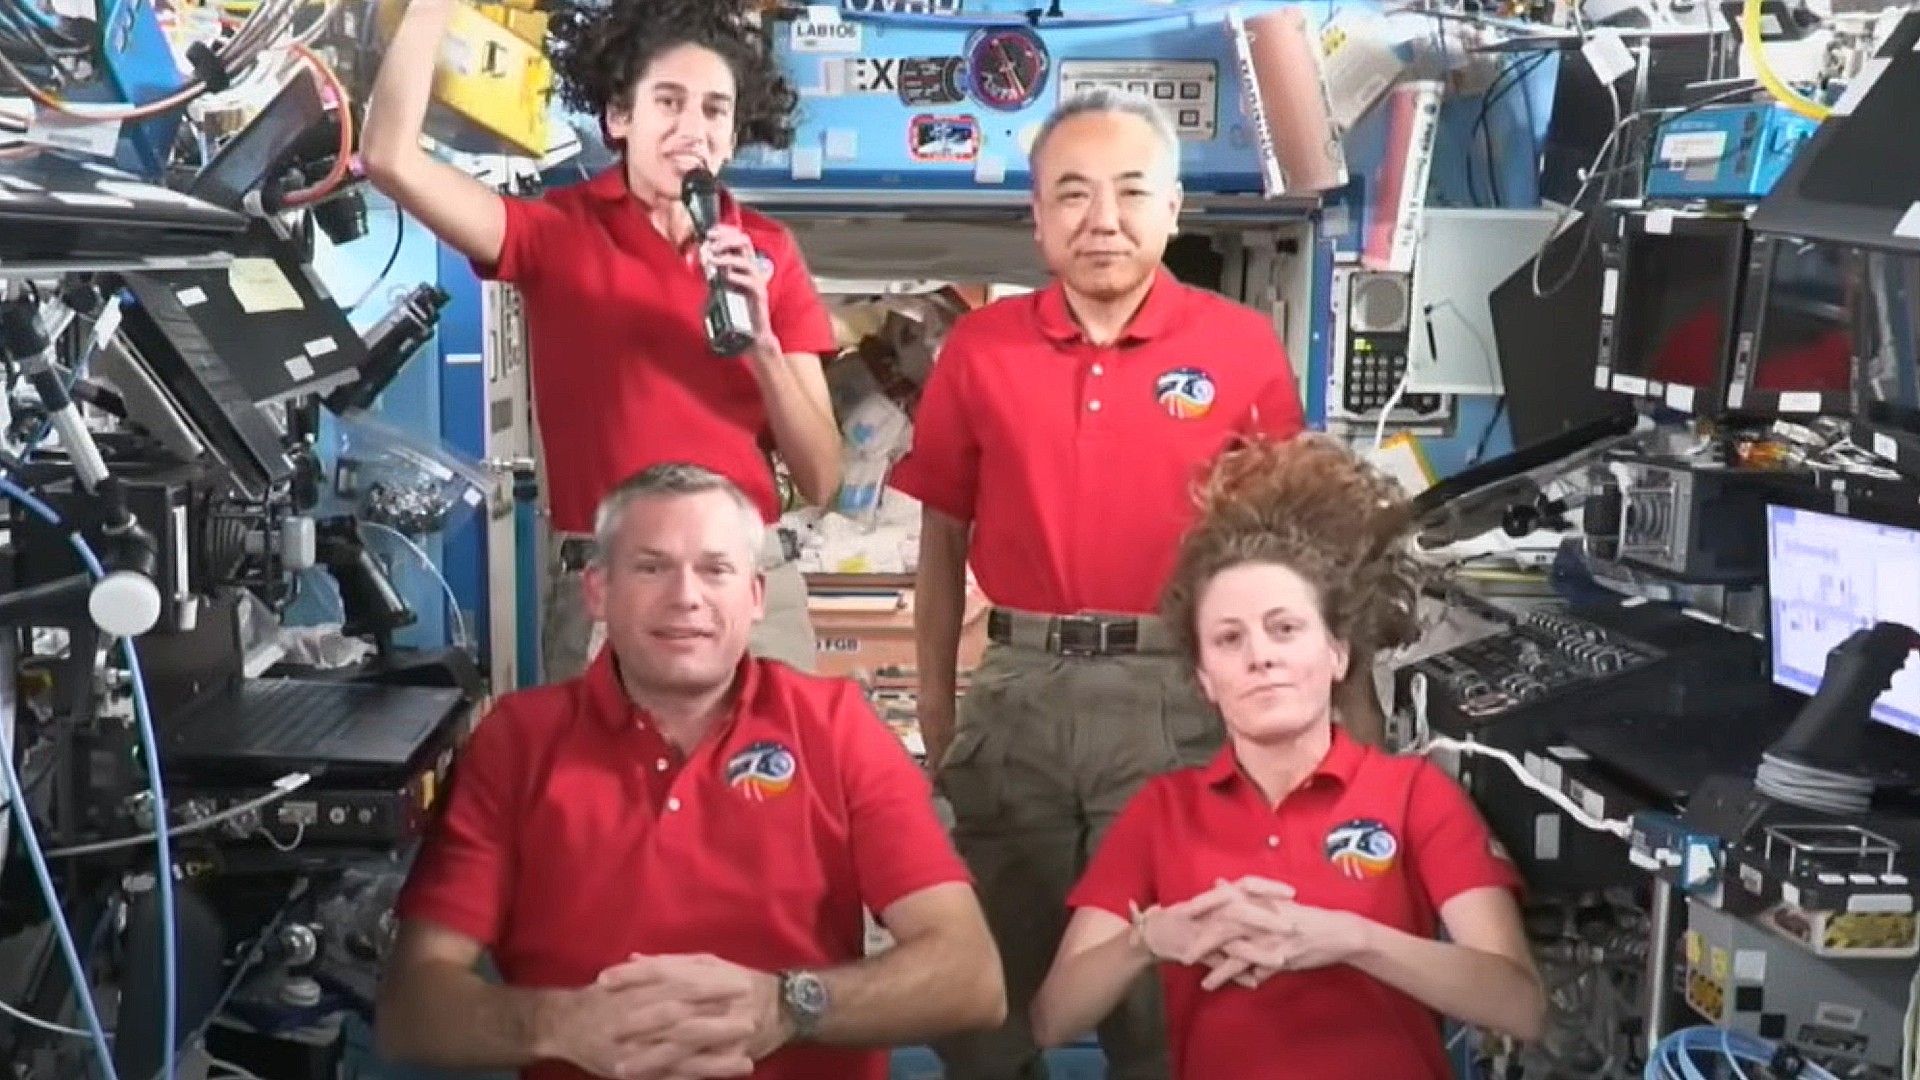 Astronauts celebrate Thanksgiving in space! Here’s what they’ll eat and what they’re thankful for (video) Space